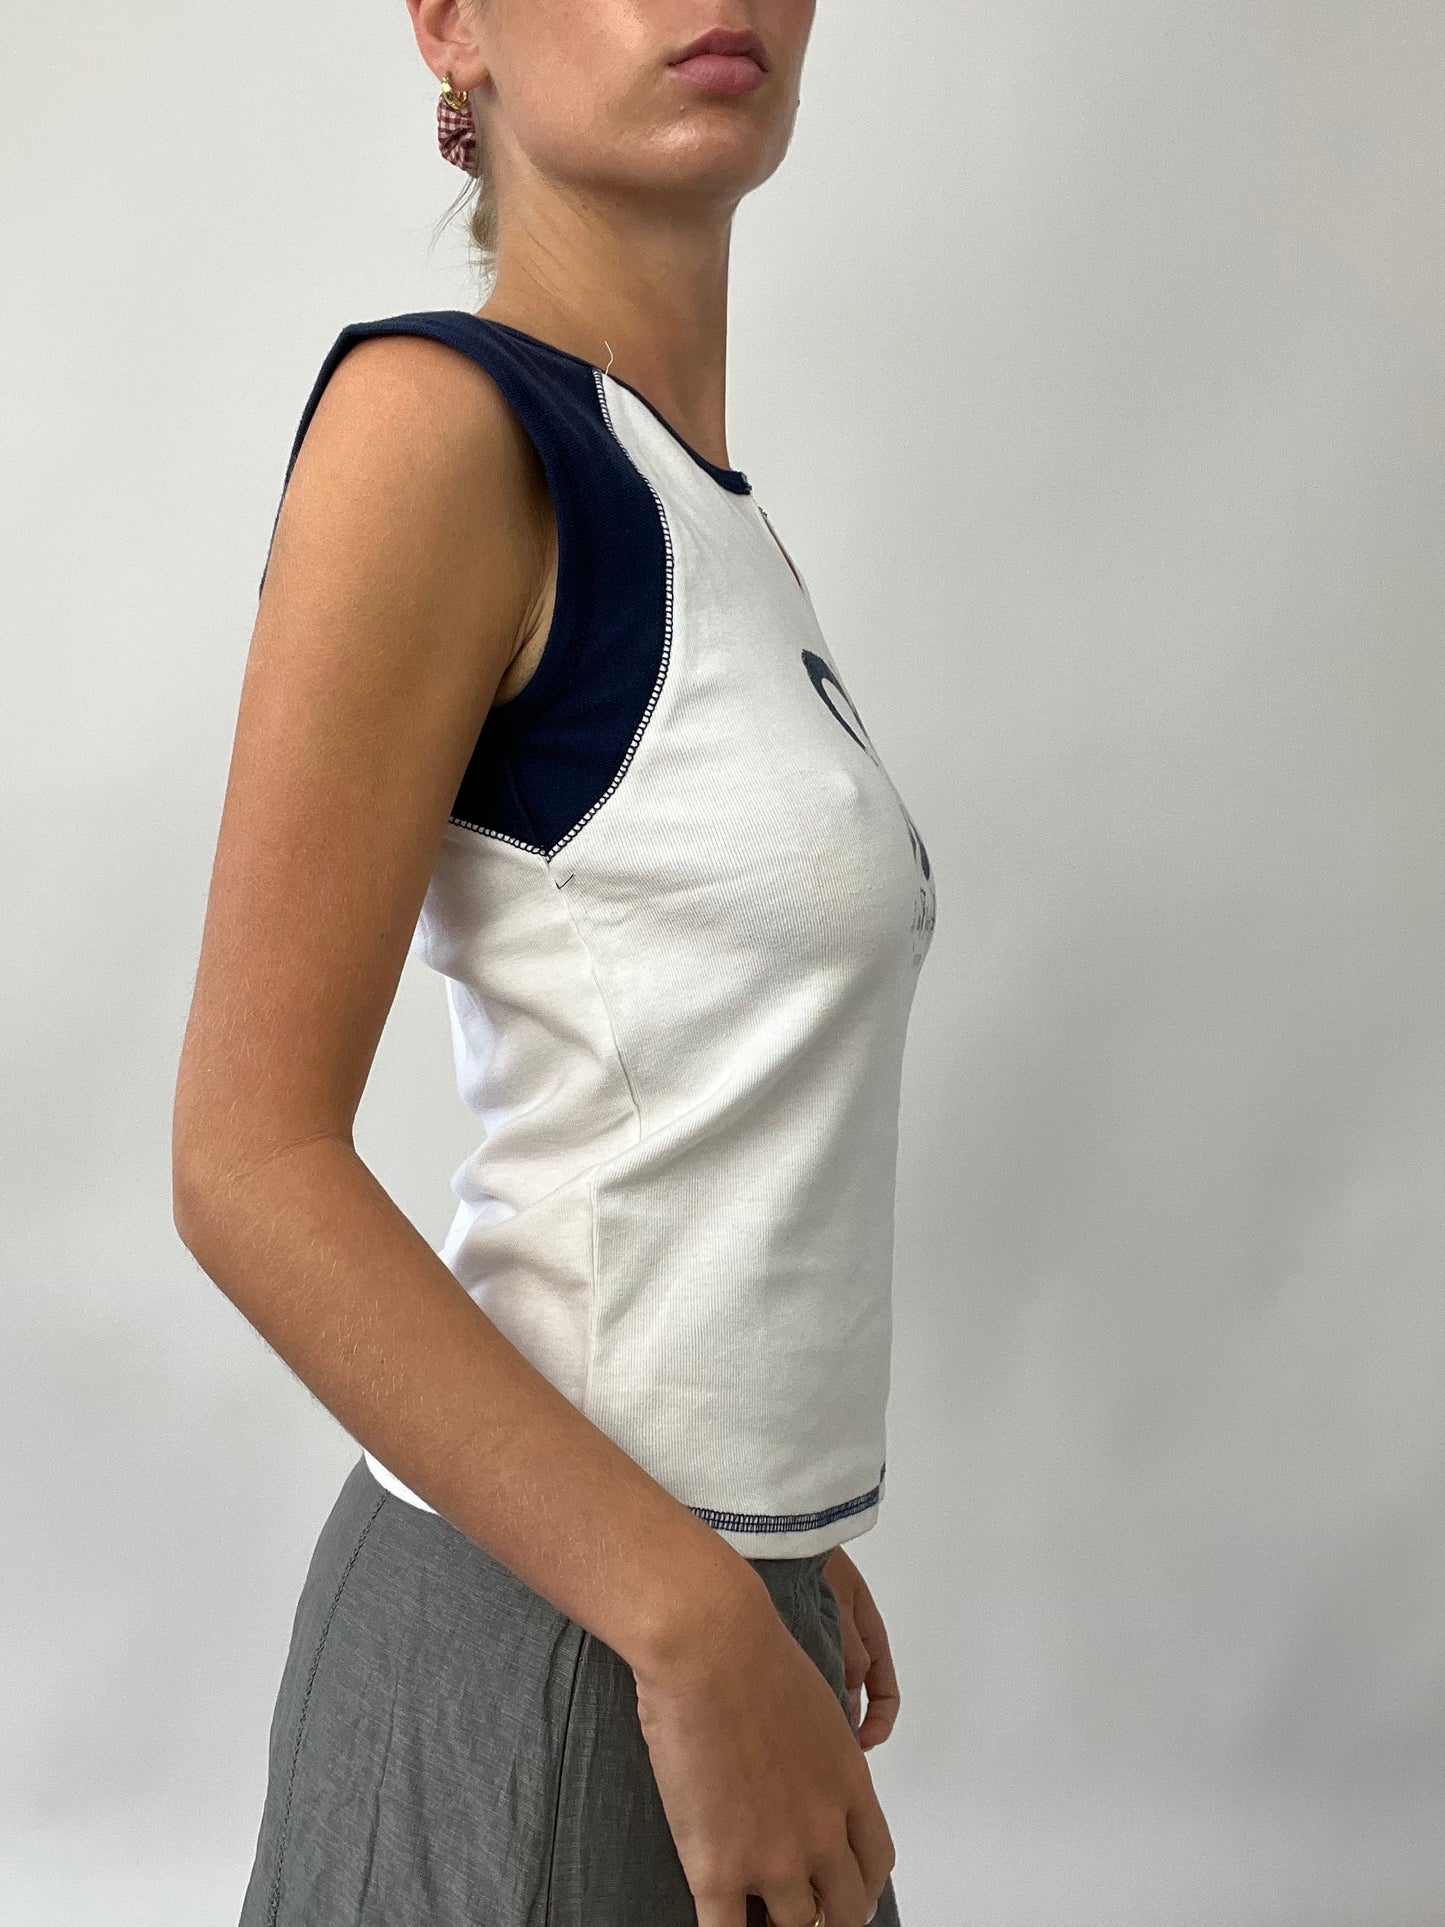 PUB GARDEN DROP | small white and navy hard rock cafe top